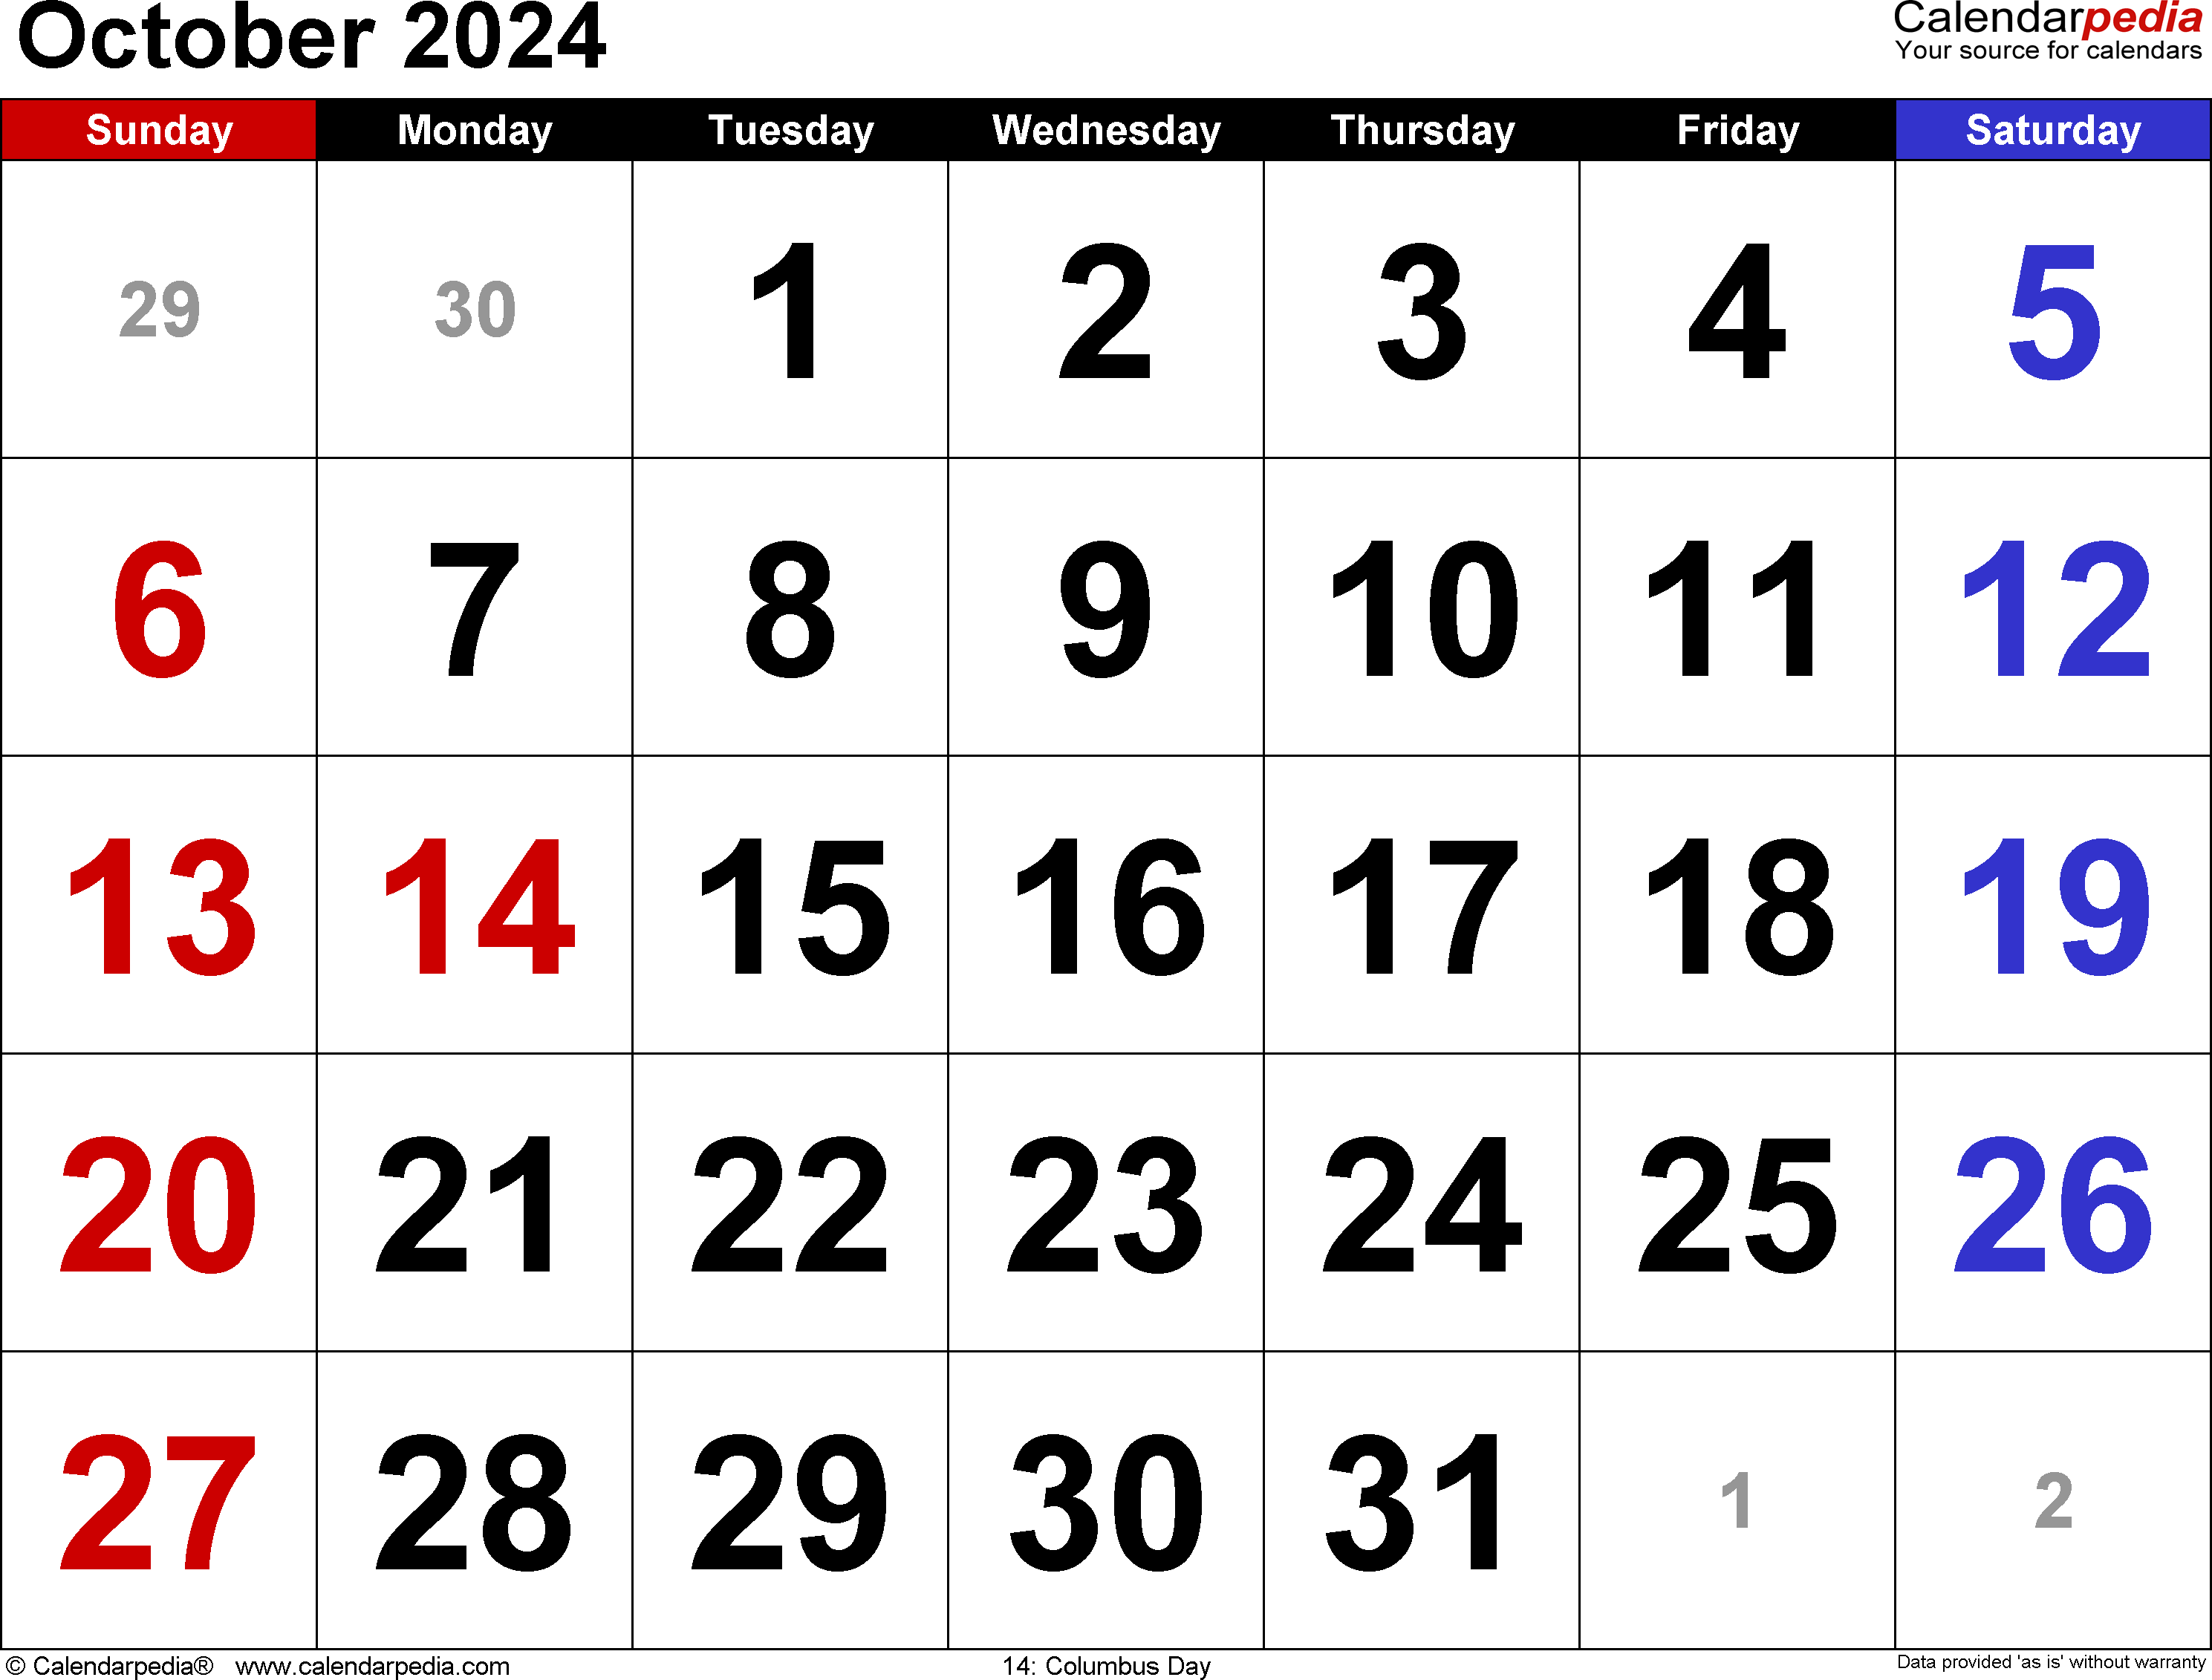 October 2024 Calendar | Templates For Word, Excel And Pdf intended for Free Printable Appointment Calendar October 2024